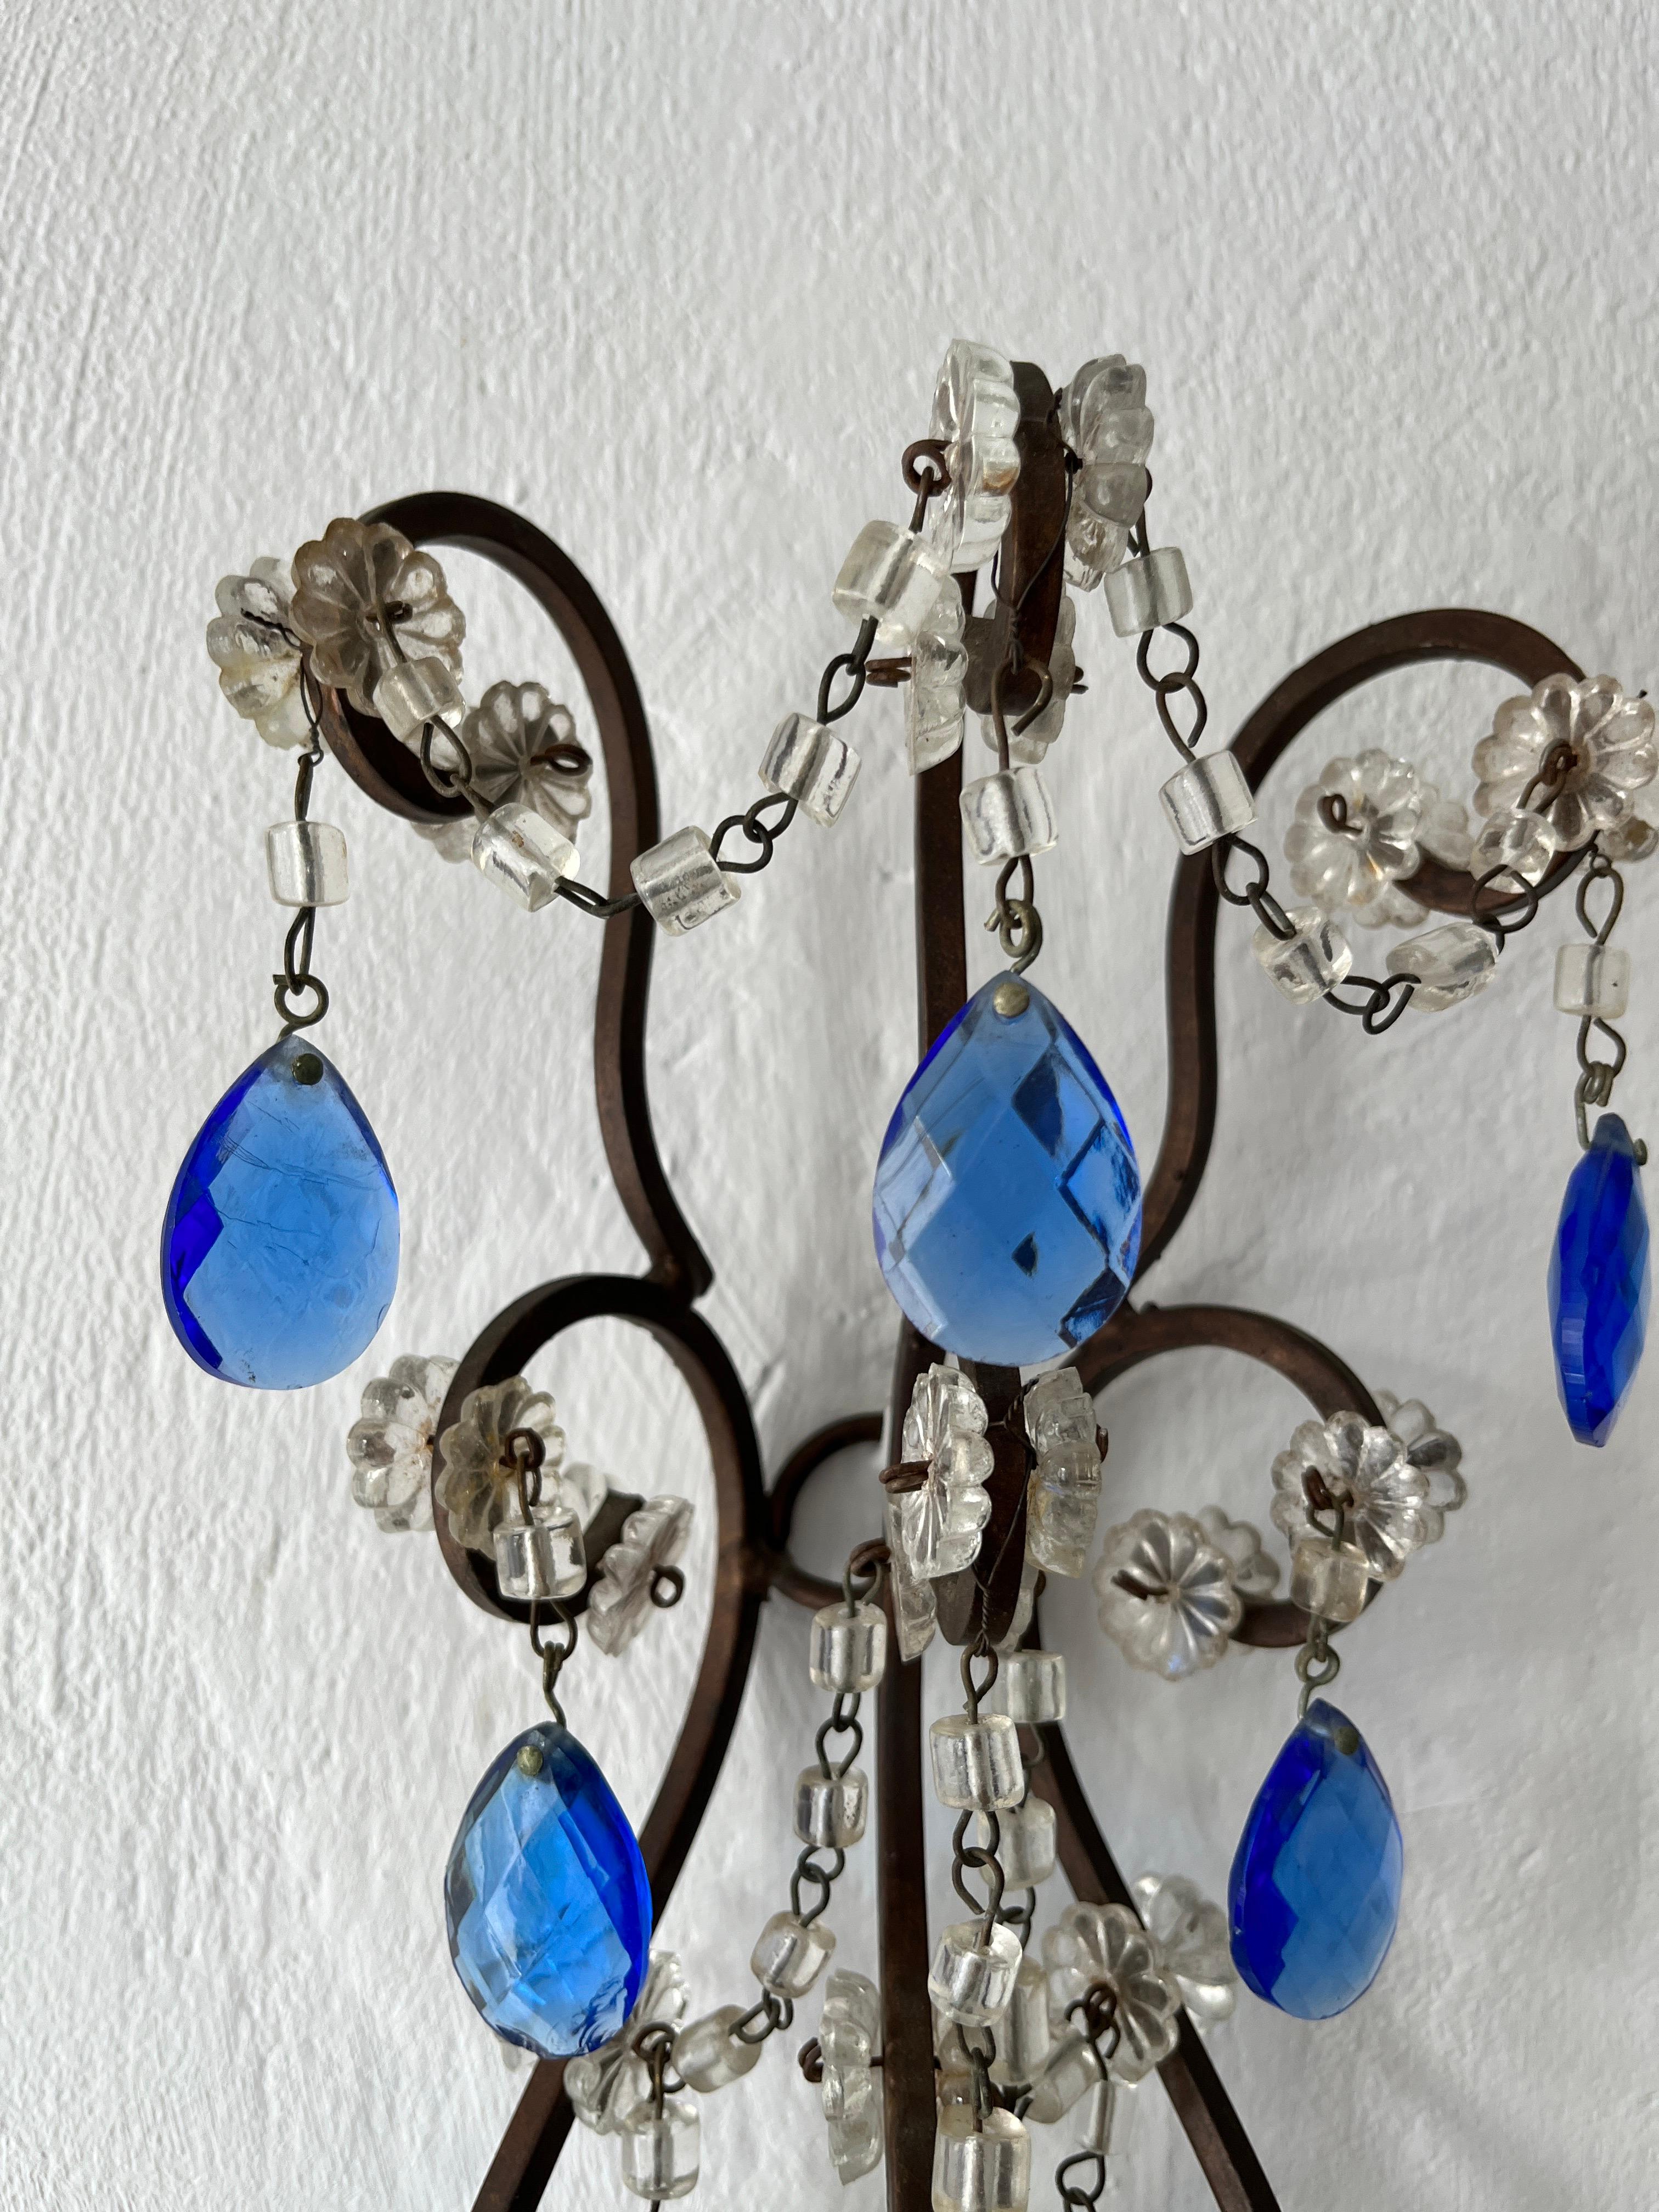 Beautiful French Cobalt Blue Prisms Macaroni Bead Swags Sconces c1920 For Sale 3